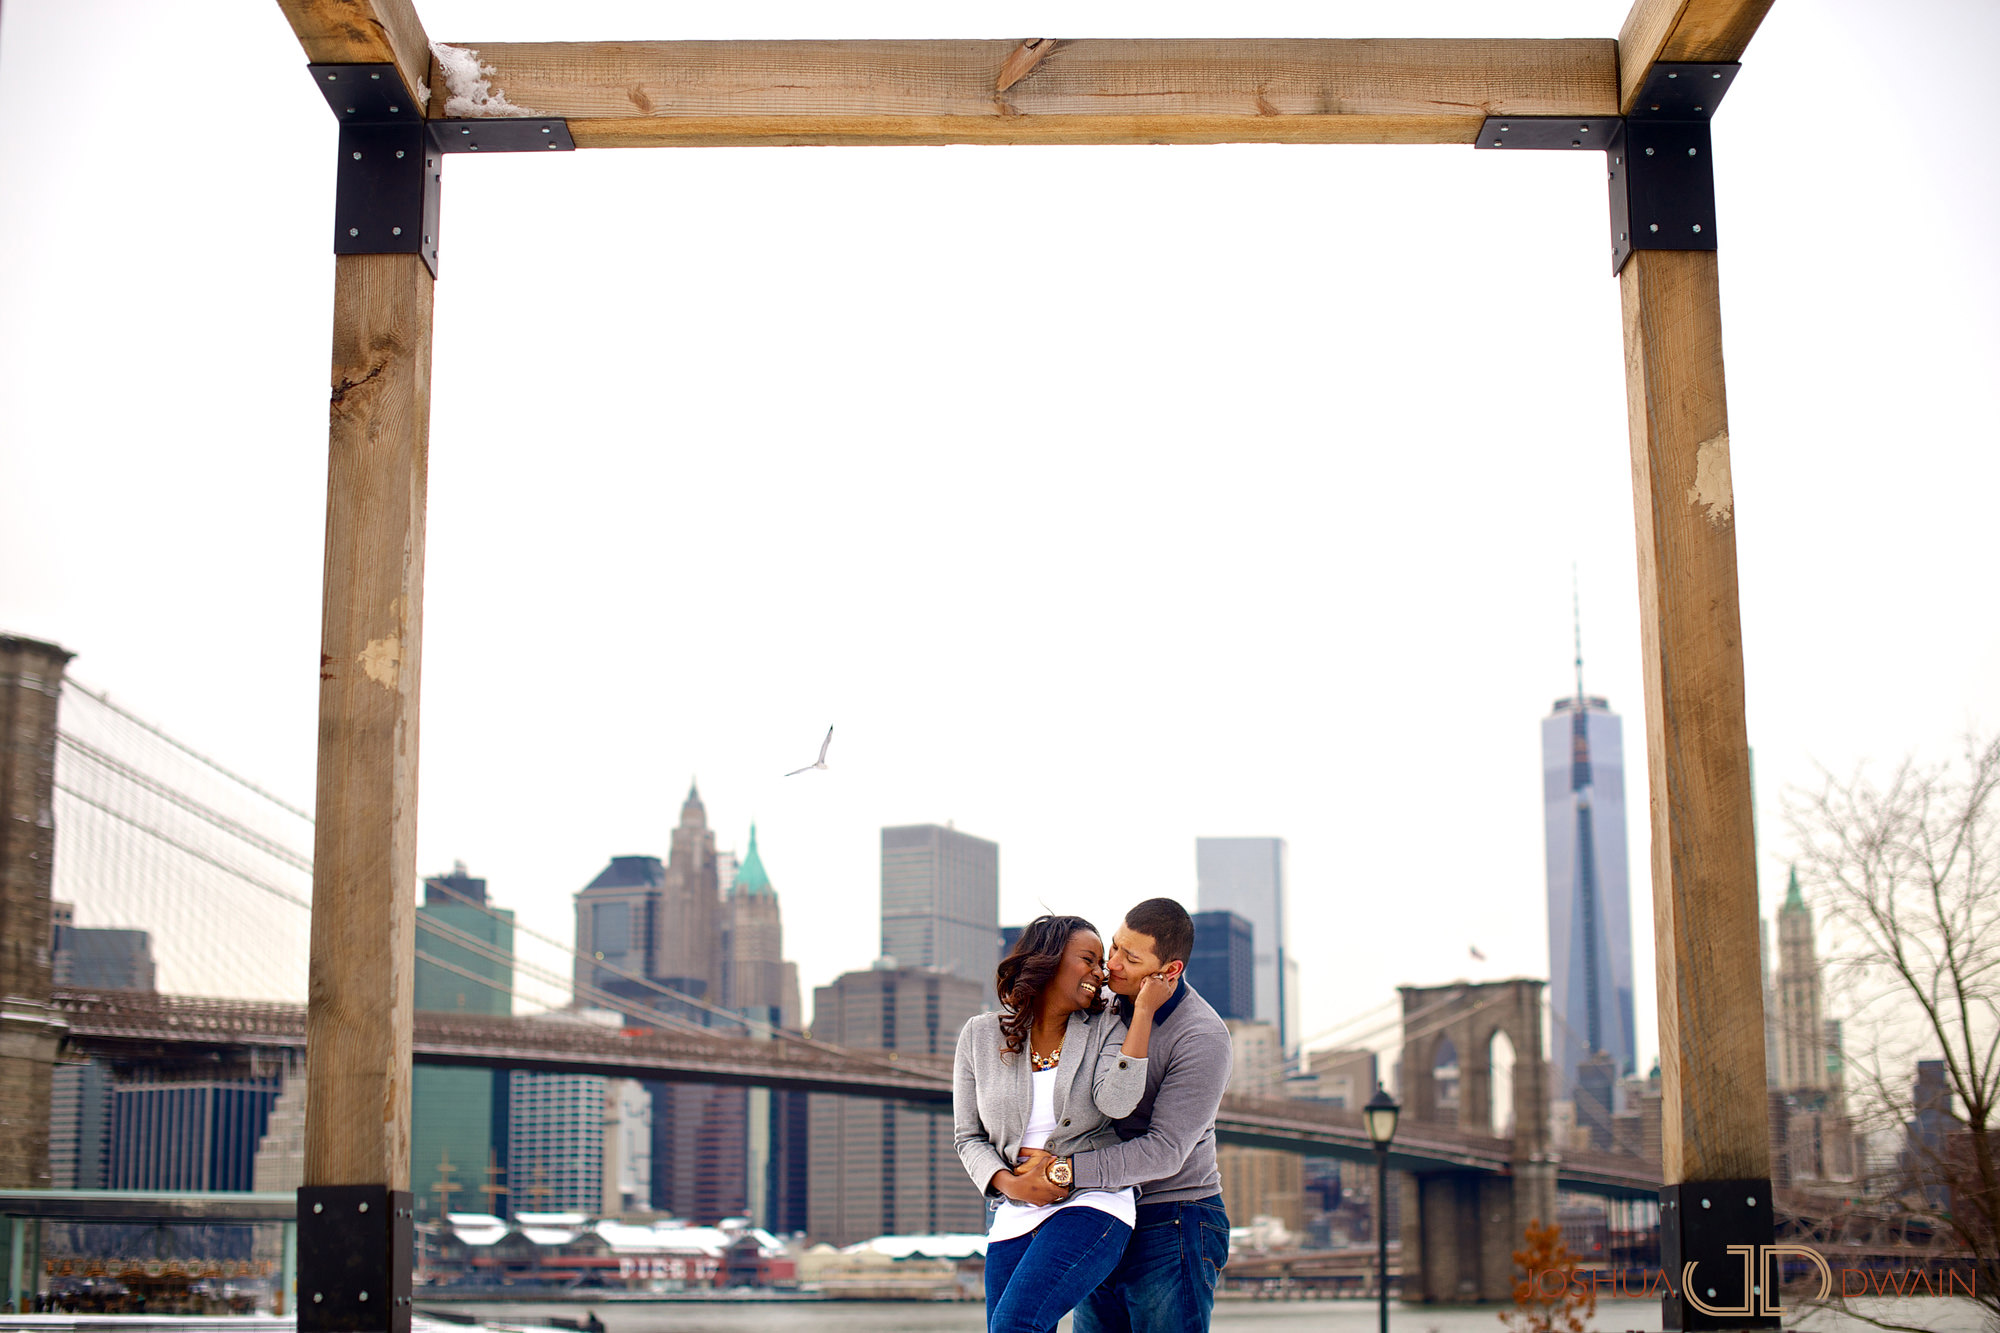 Anna & Edwin's Engagement Session in Dumbo, Brooklyn, NY